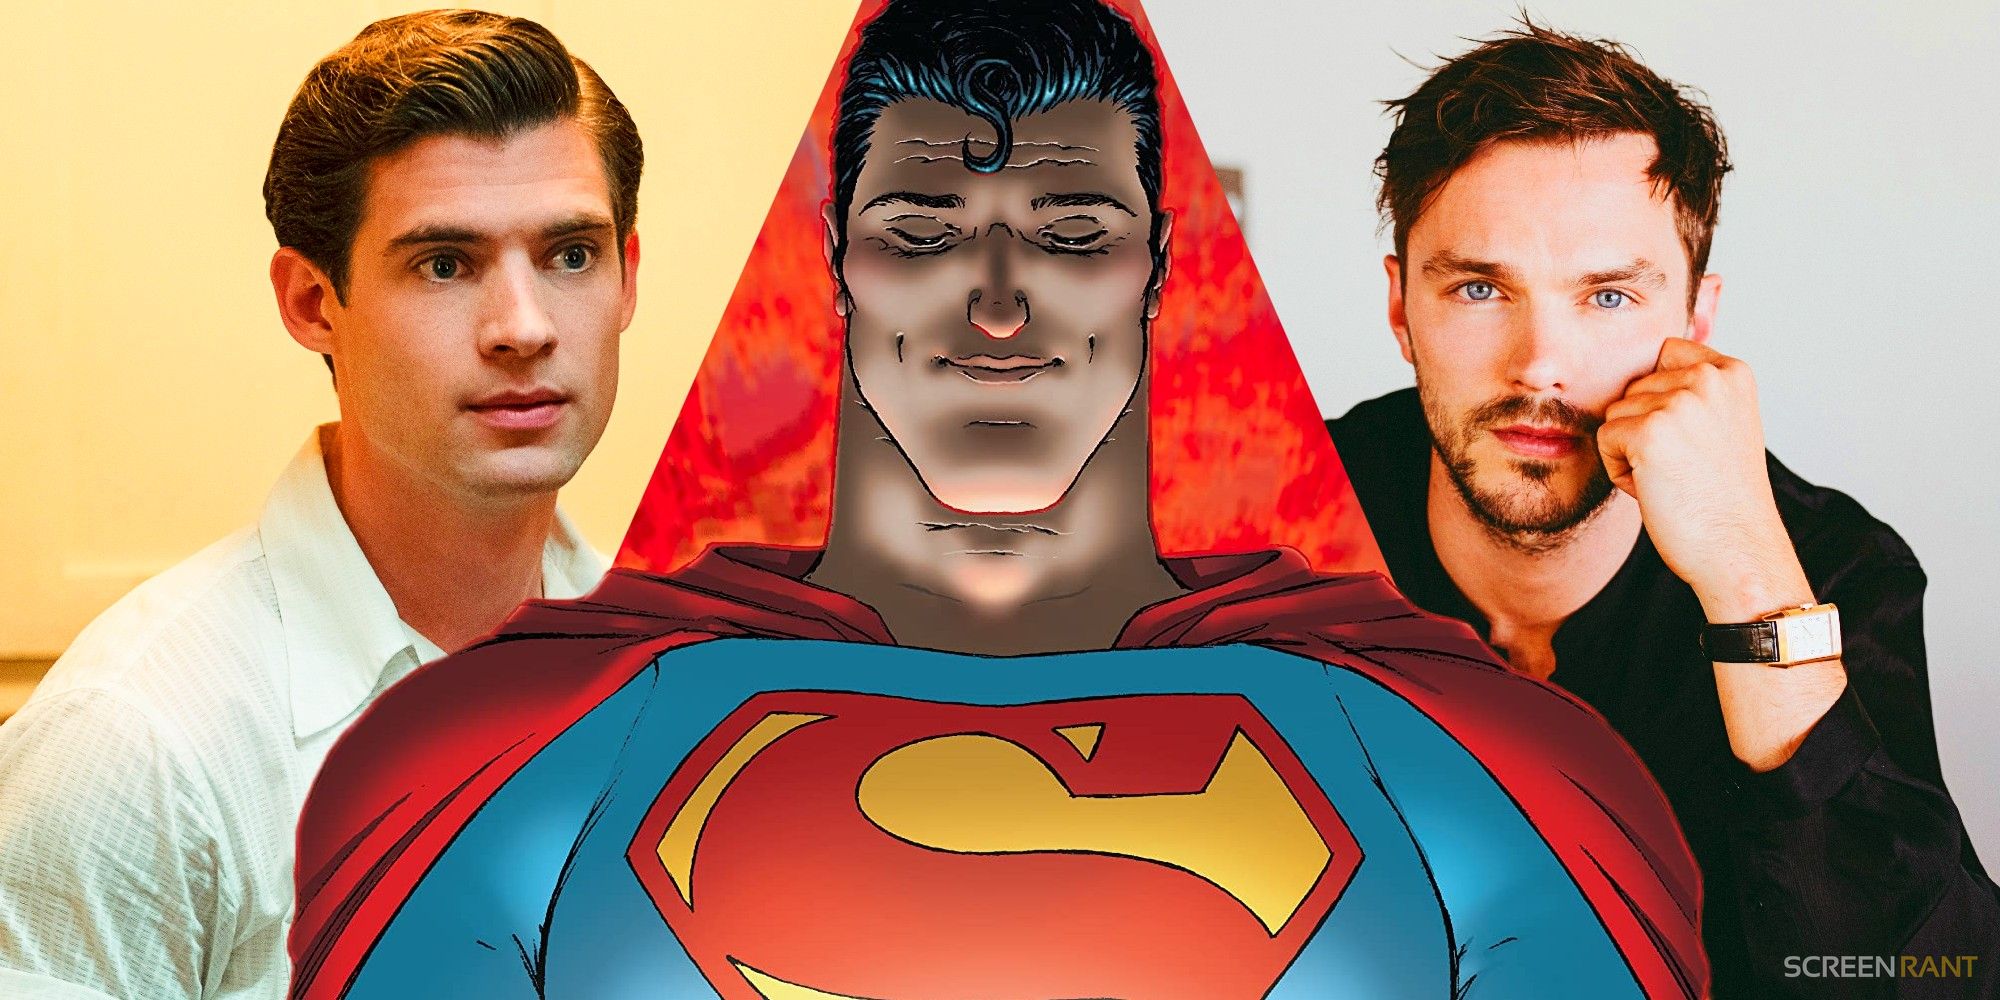 Montage of Superman: Legacy frontrunners David Corenswet and Nicholas Hoult at each side of a Superman from the comics.